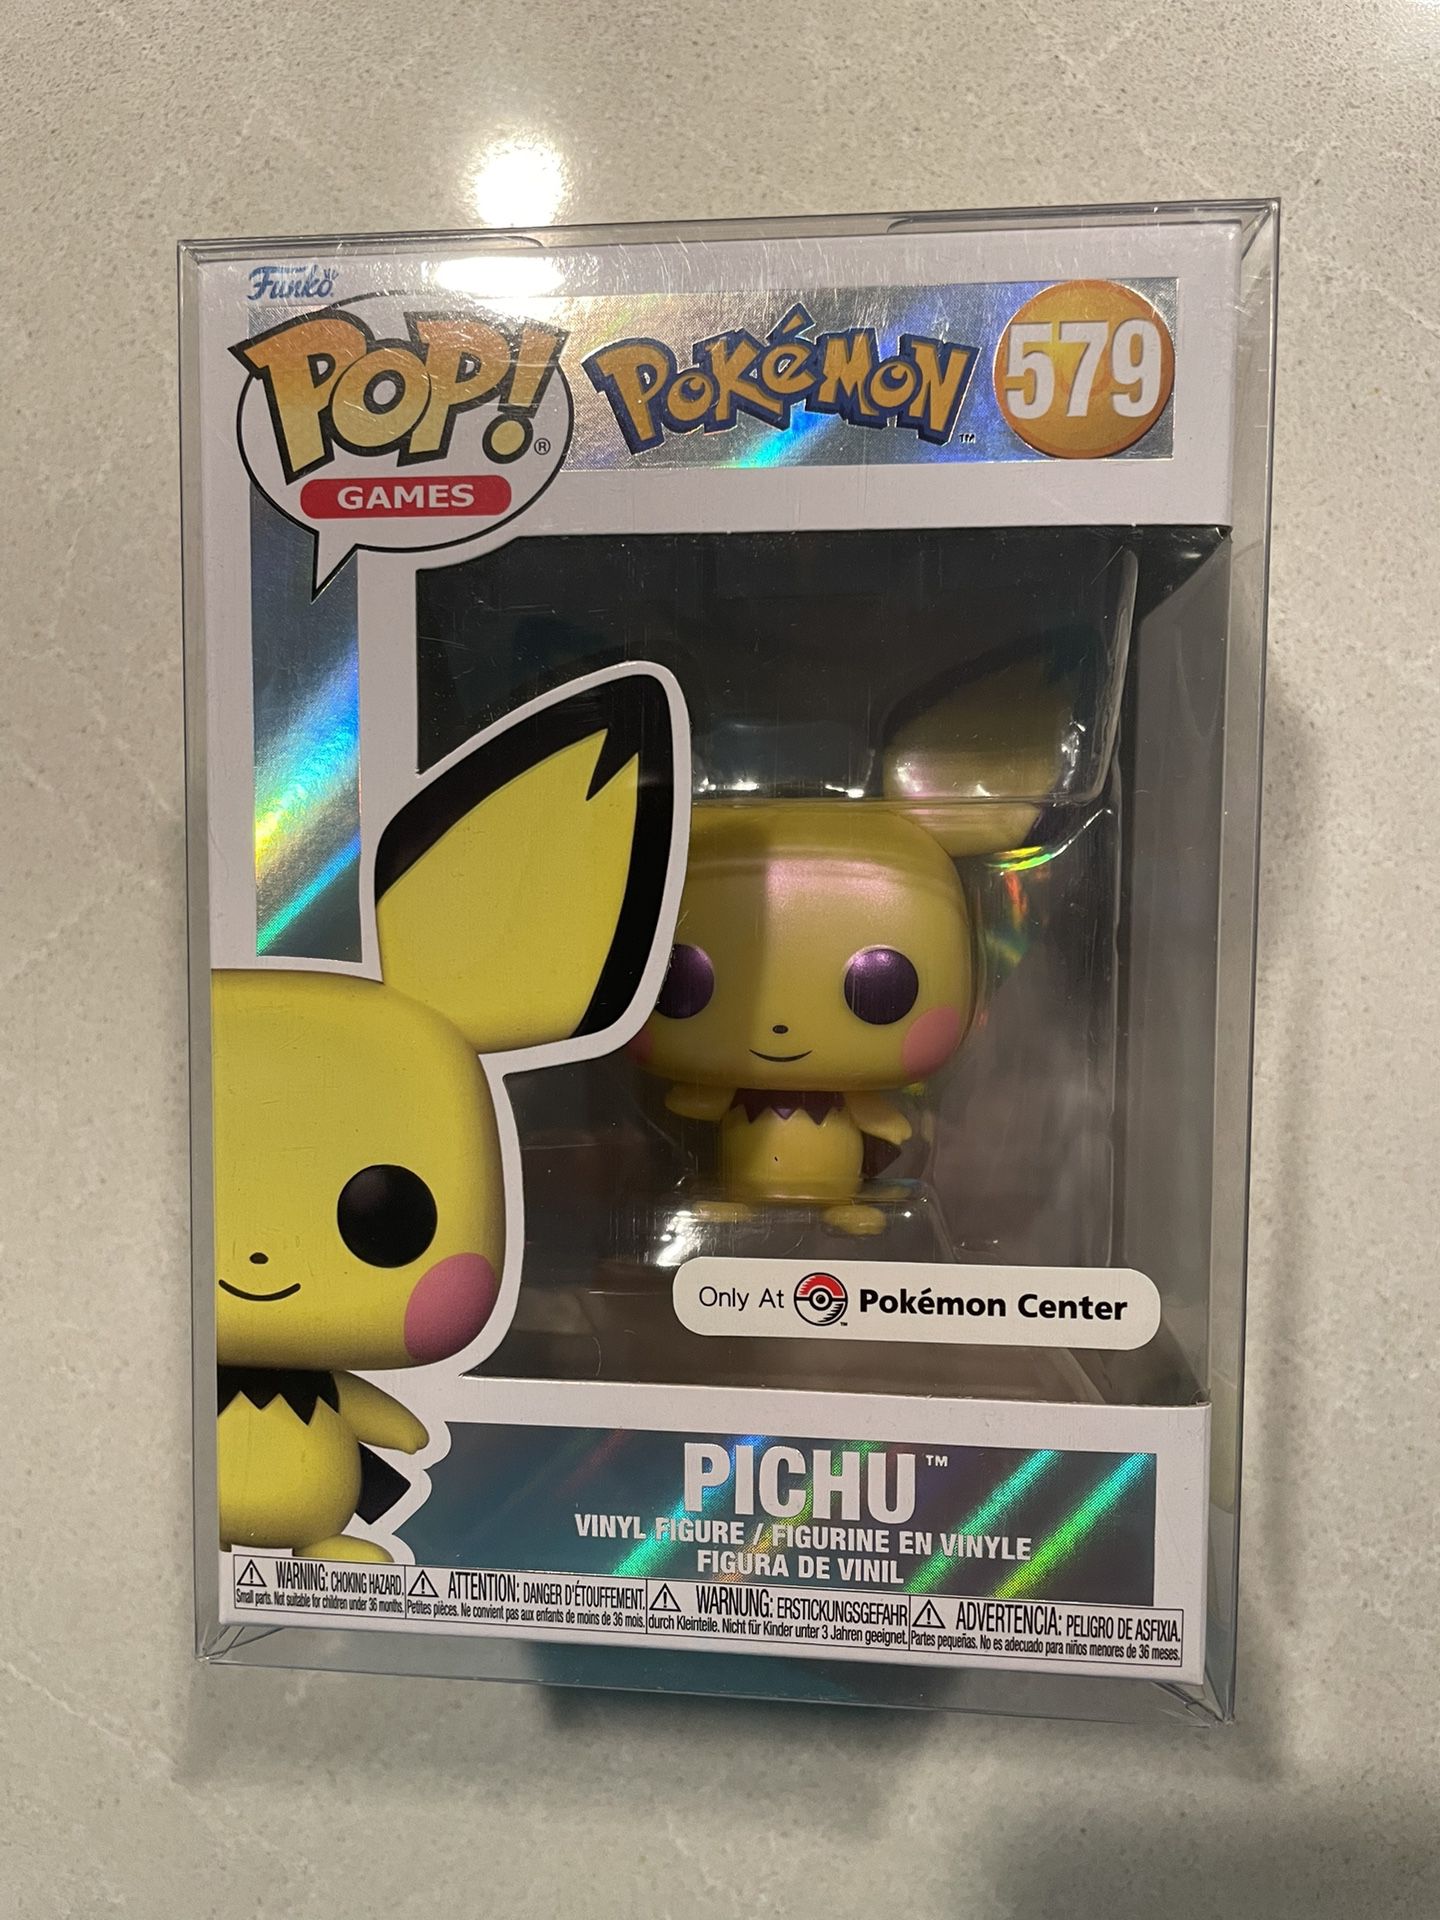 Pearlescent Pichu Pop *MINT* Pokemon Center Exclusive Pokémon 579 with Protector Pikachu Games